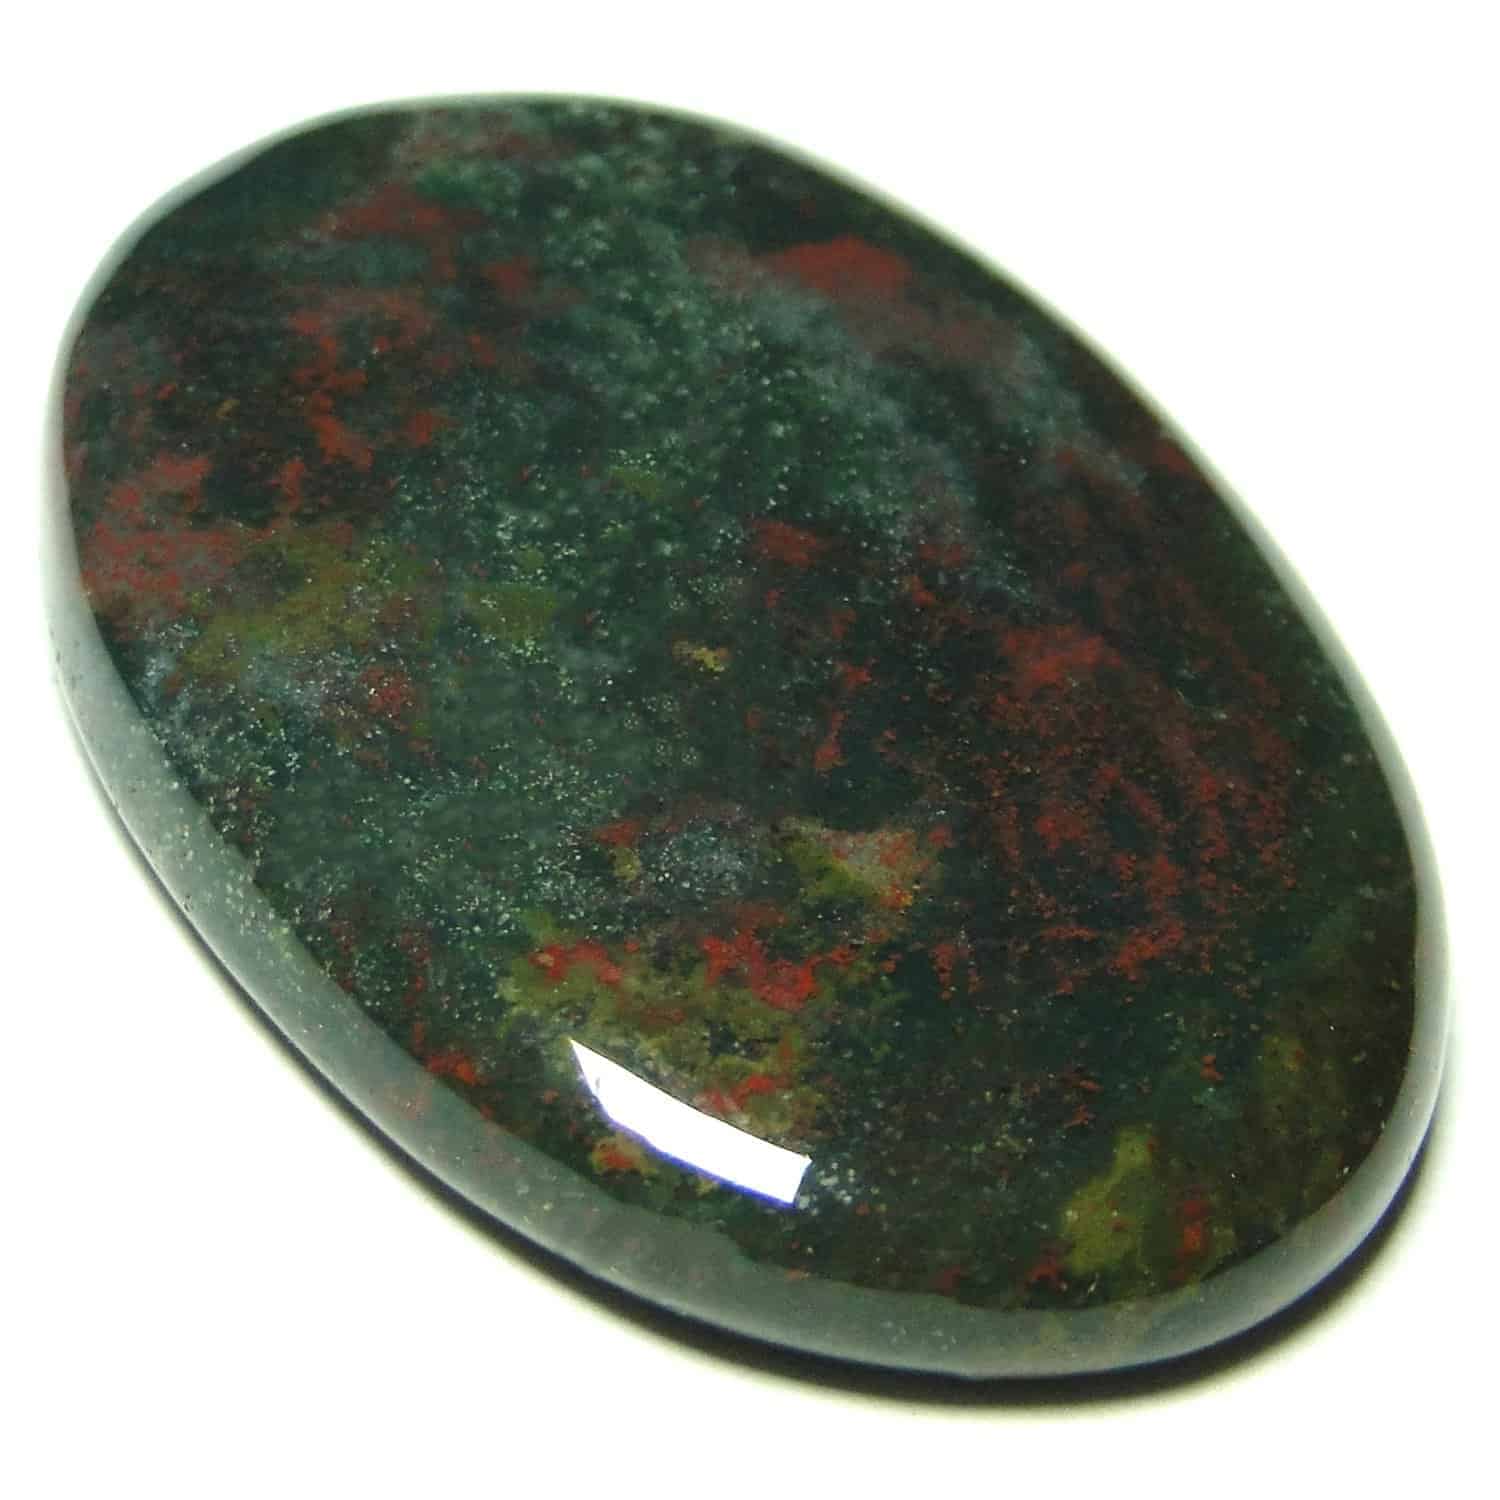 Amazing Bloodstone cabochon stone oval shaped heliotrope mineral BL20 for necklace supply for pendant